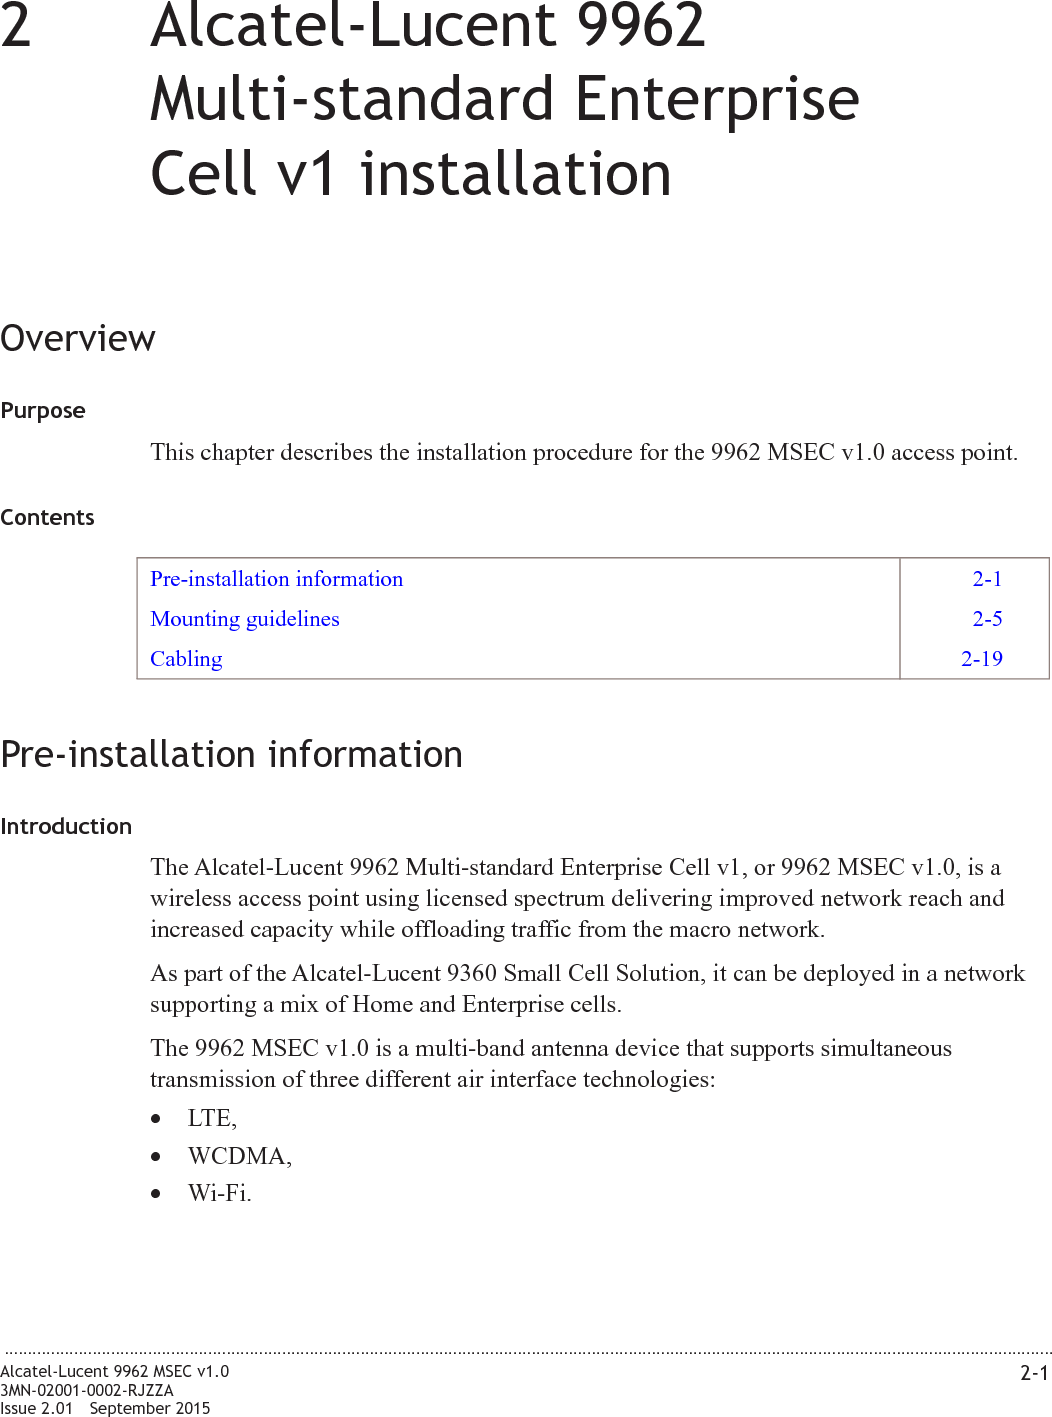 22Alcatel-Lucent 9962Multi-standard EnterpriseCell v1 installationOverviewPurposeThis chapter describes the installation procedure for the 9962 MSEC v1.0 access point.ContentsPre-installation information 2-1Mounting guidelines 2-5Cabling 2-19Pre-installation informationIntroductionThe Alcatel-Lucent 9962 Multi-standard Enterprise Cell v1, or 9962 MSEC v1.0, is awireless access point using licensed spectrum delivering improved network reach andincreased capacity while offloading traffic from the macro network.As part of the Alcatel-Lucent 9360 Small Cell Solution, it can be deployed in a networksupporting a mix of Home and Enterprise cells.The 9962 MSEC v1.0 is a multi-band antenna device that supports simultaneoustransmission of three different air interface technologies:•LTE,•WCDMA,•Wi-Fi....................................................................................................................................................................................................................................Alcatel-Lucent 9962 MSEC v1.03MN-02001-0002-RJZZAIssue 2.01 September 20152-1PRELIMINARYPRELIMINARY